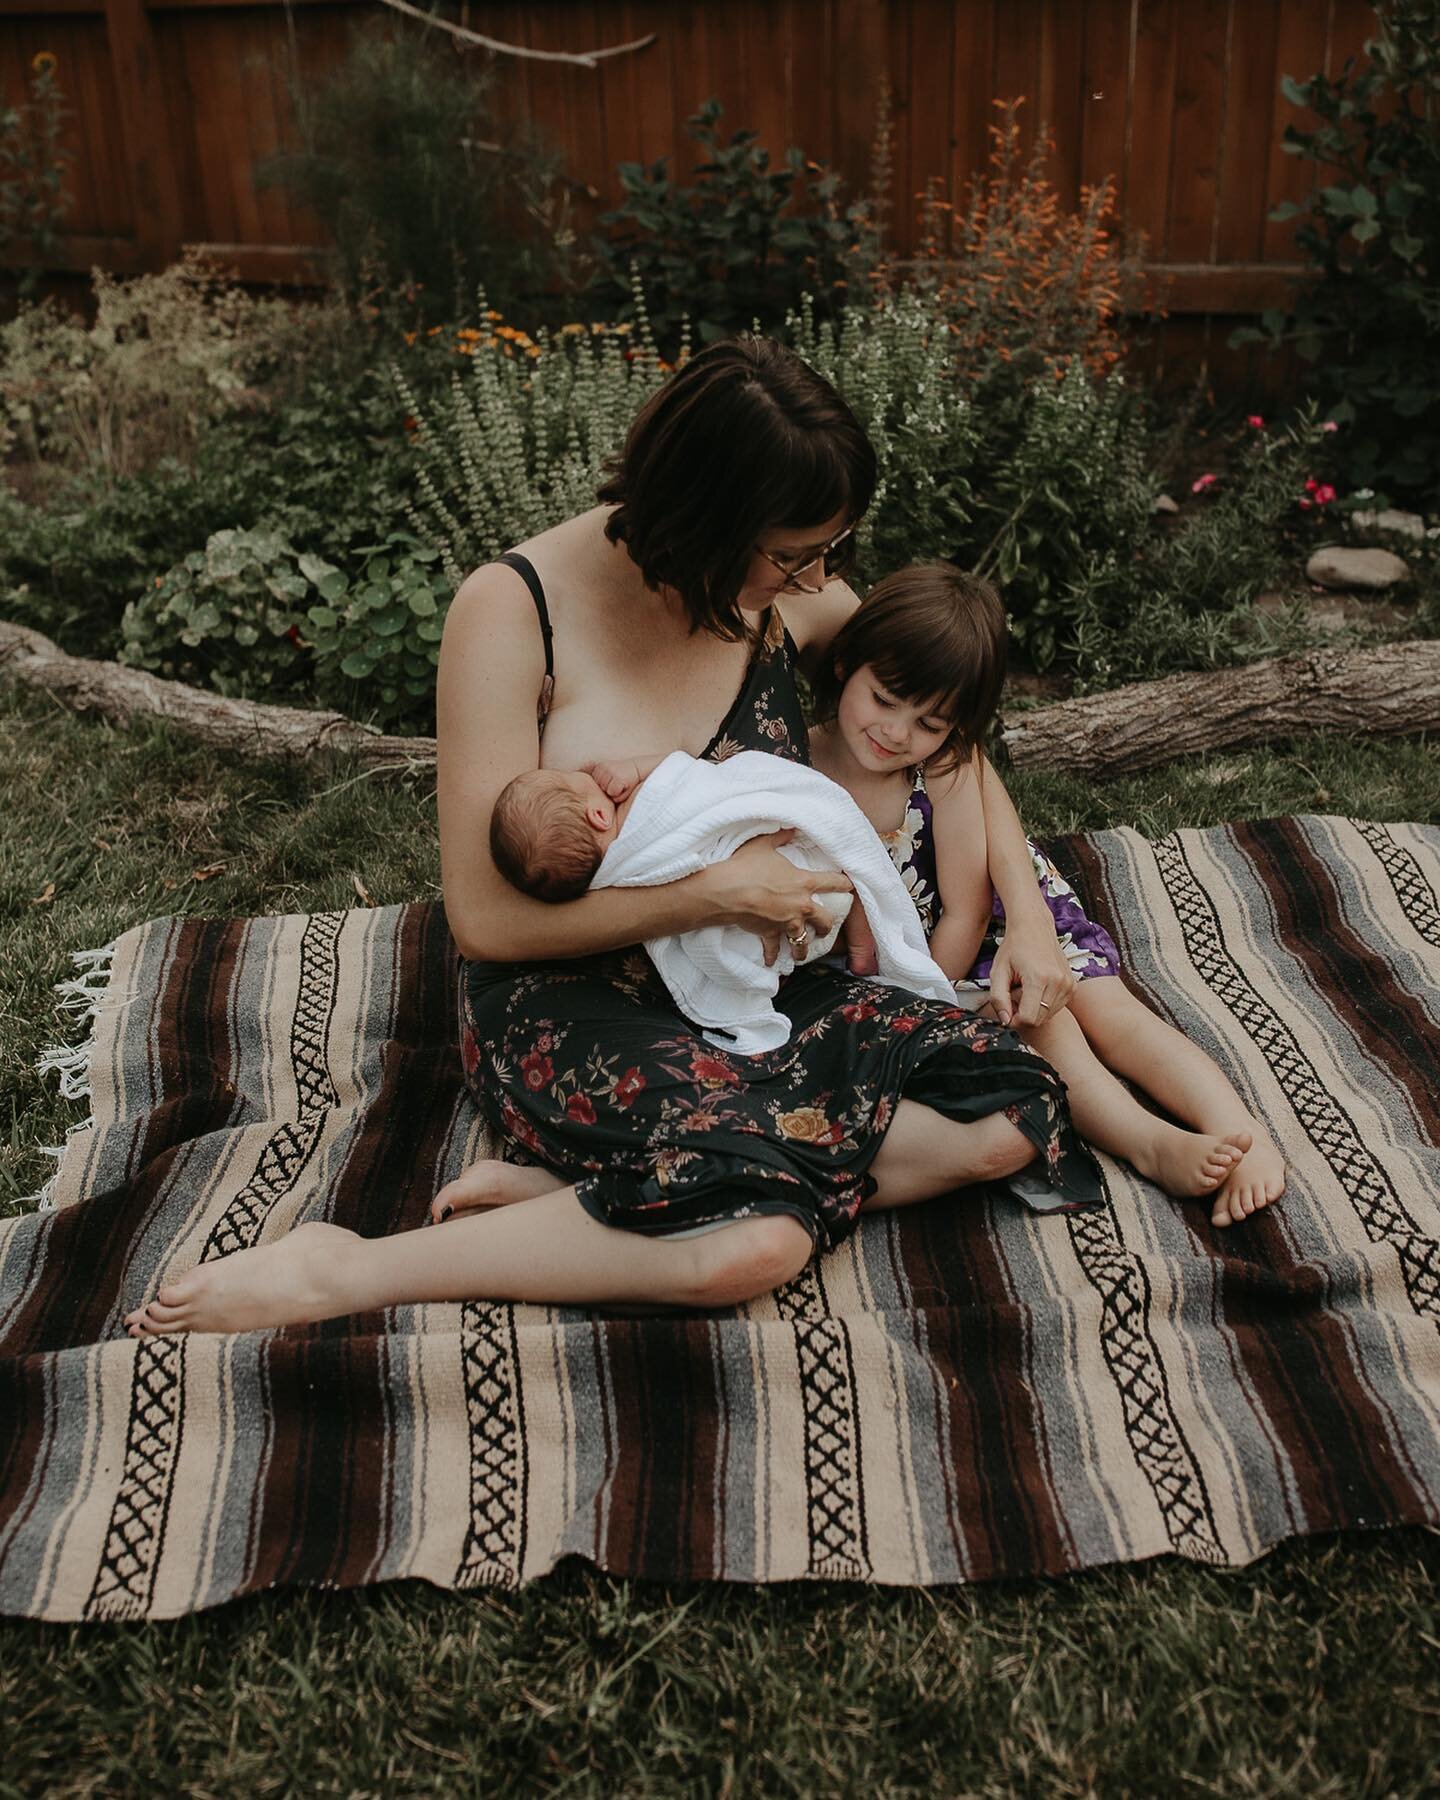 In the whirlwind that was a very busy summer &amp; fall I never got go post @wildsage.midwife &lsquo;s birth story. It&rsquo;ll be up Monday, though, along with more of these images from the day after. 🧡🌿